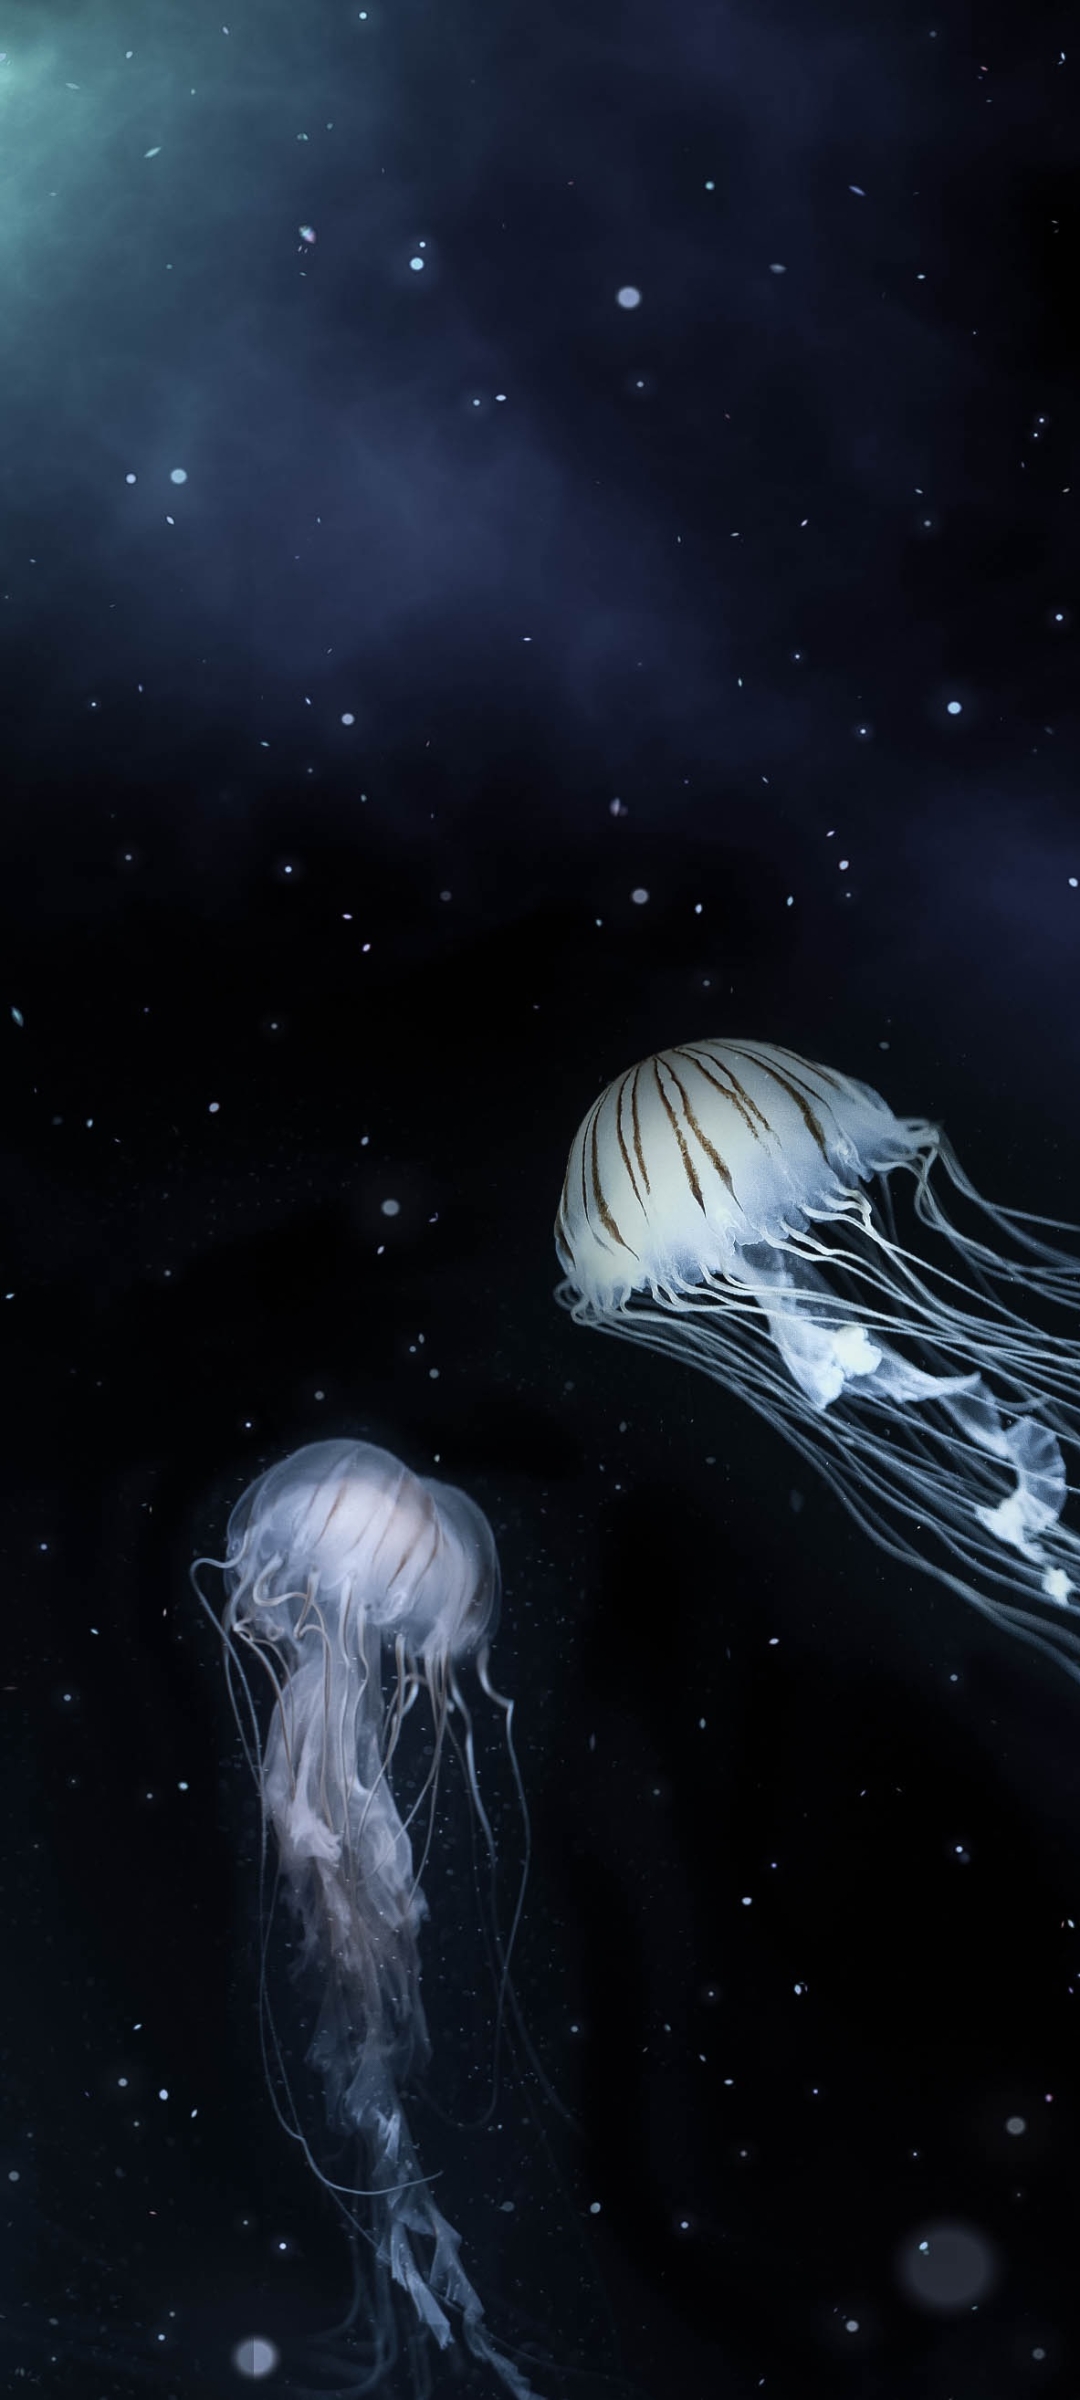 Jellyfish among the stars by Willgard Krause